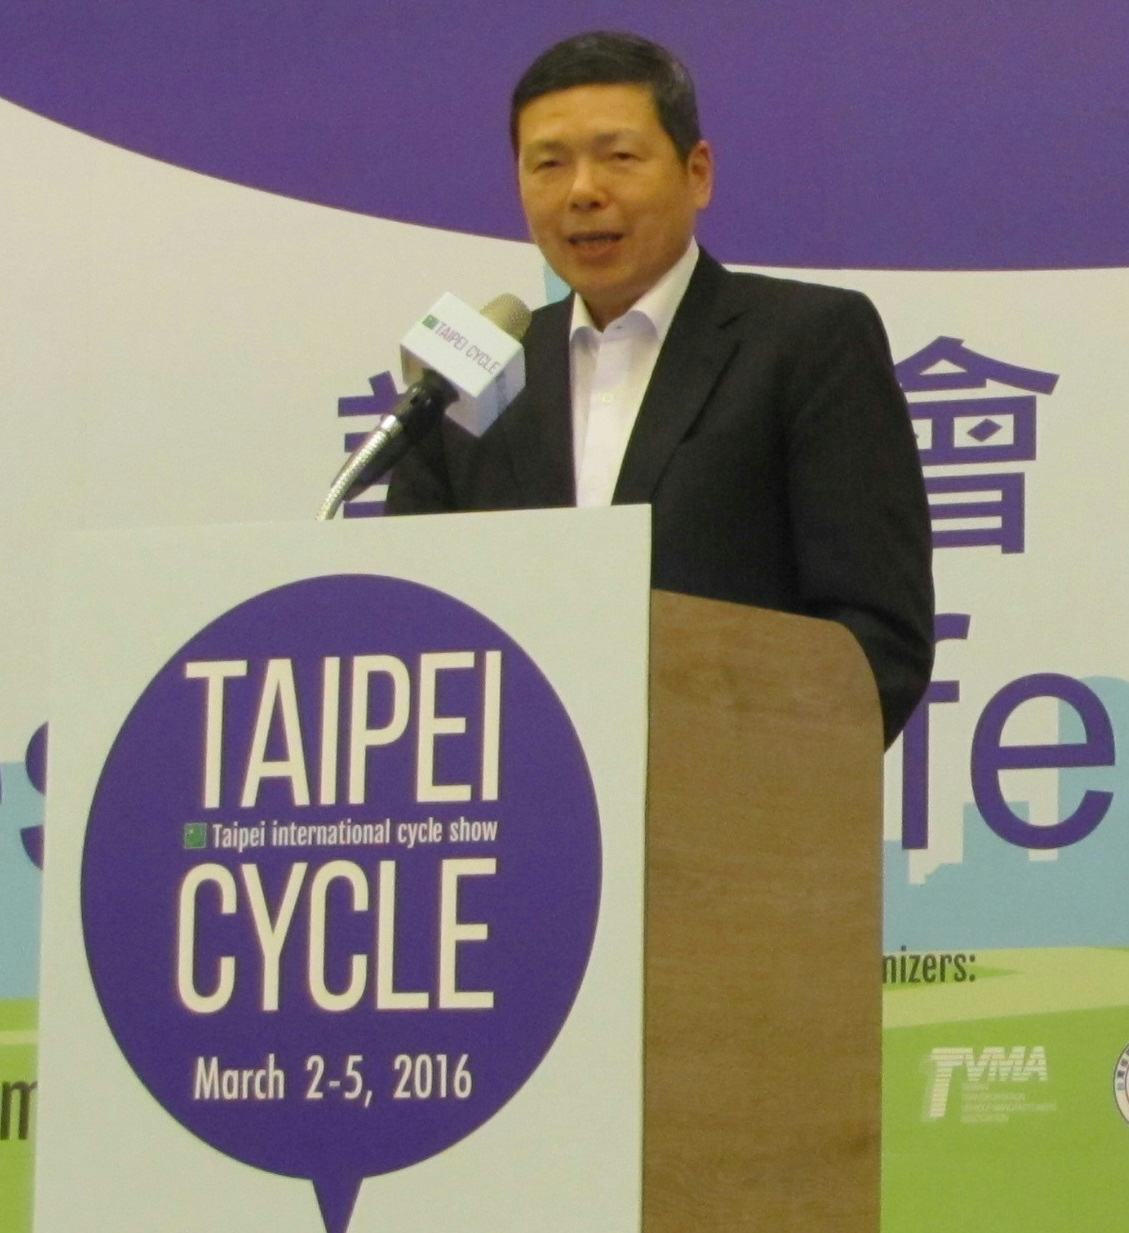 ‘The combination of both events gives us a great opportunity to show the world Taiwan’s pride in the bicycle industry,’ said Walter Yeh executive vice president of Taipei International Cycle Show organizer TAITRA. – Photo Bike Europe

